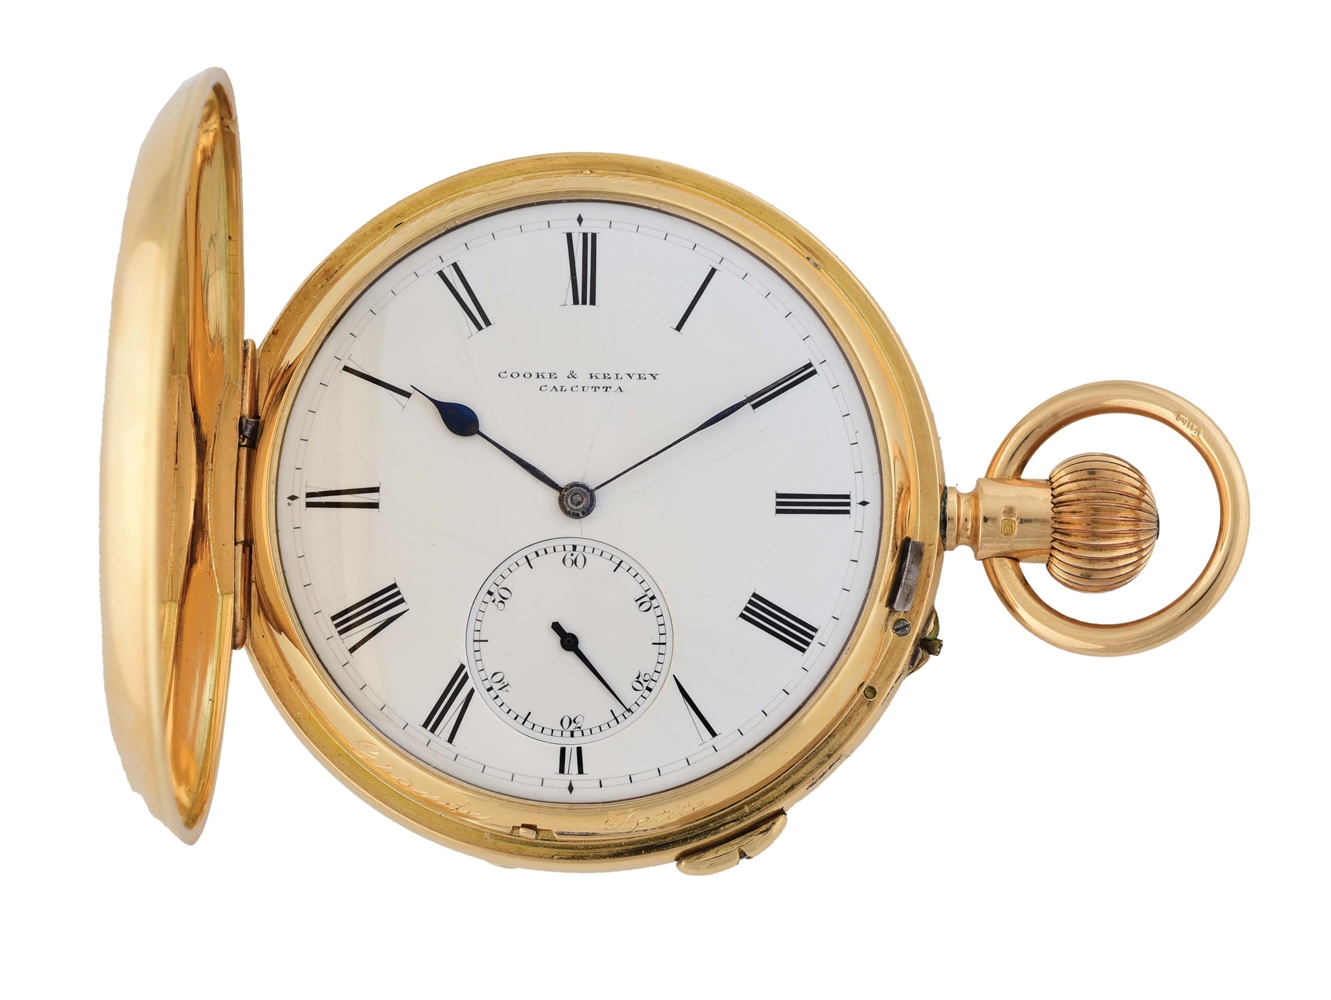 RARE AND FINE 18K GOLD COOKE & KELVEY, CALCUTTA, GRAND SONNERIE MINUTE REPEATING H/C POCKET WATCH.